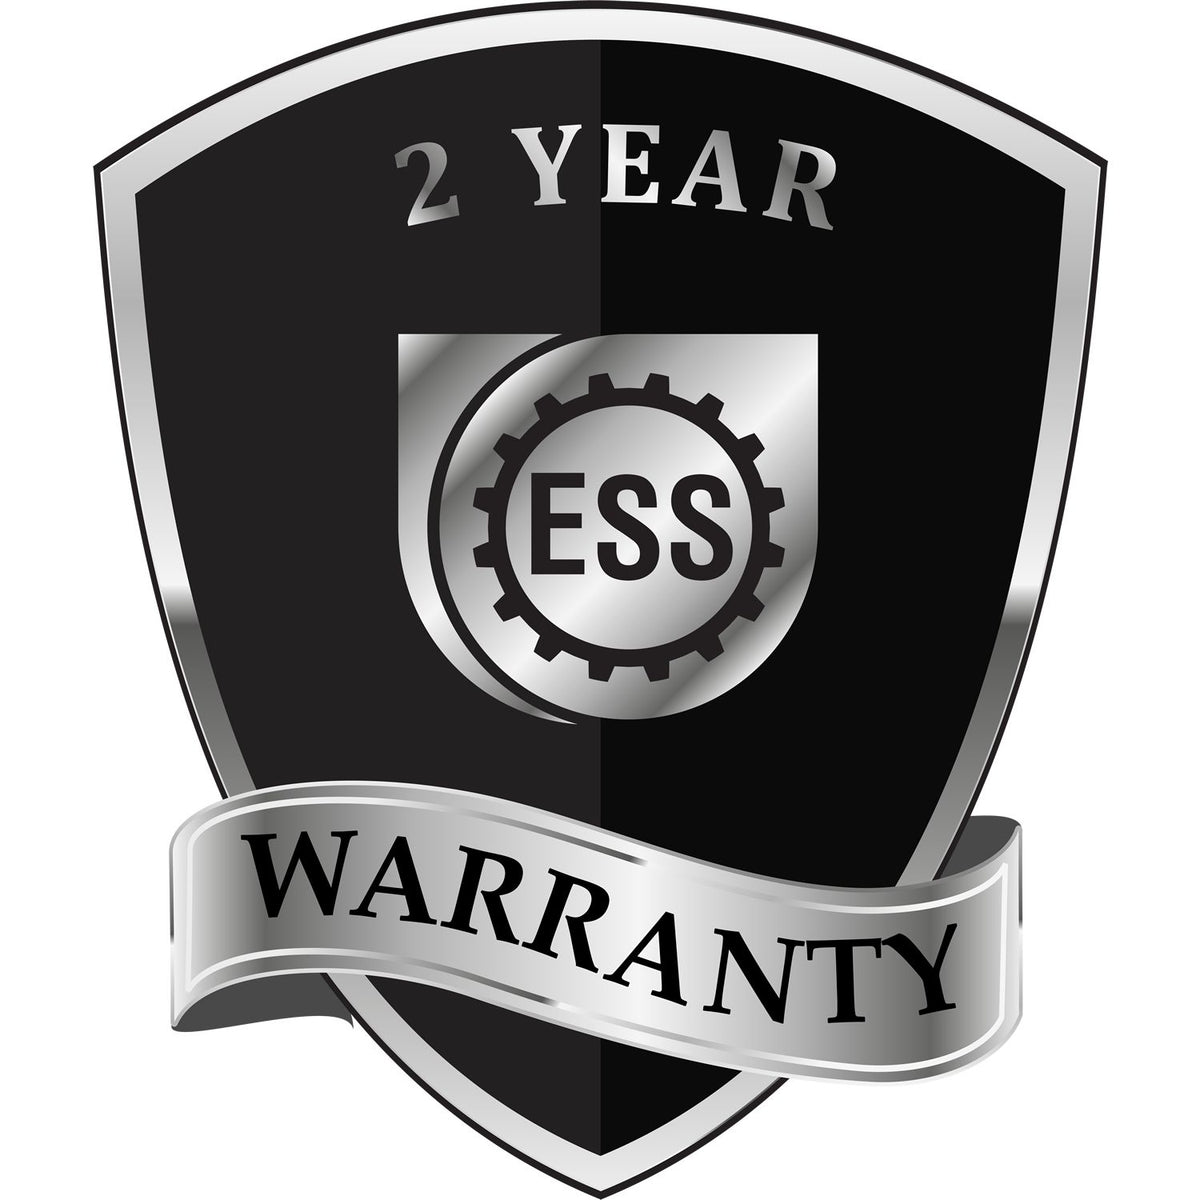 A black and silver badge or emblem showing warranty information for the Gift Kentucky Engineer Seal